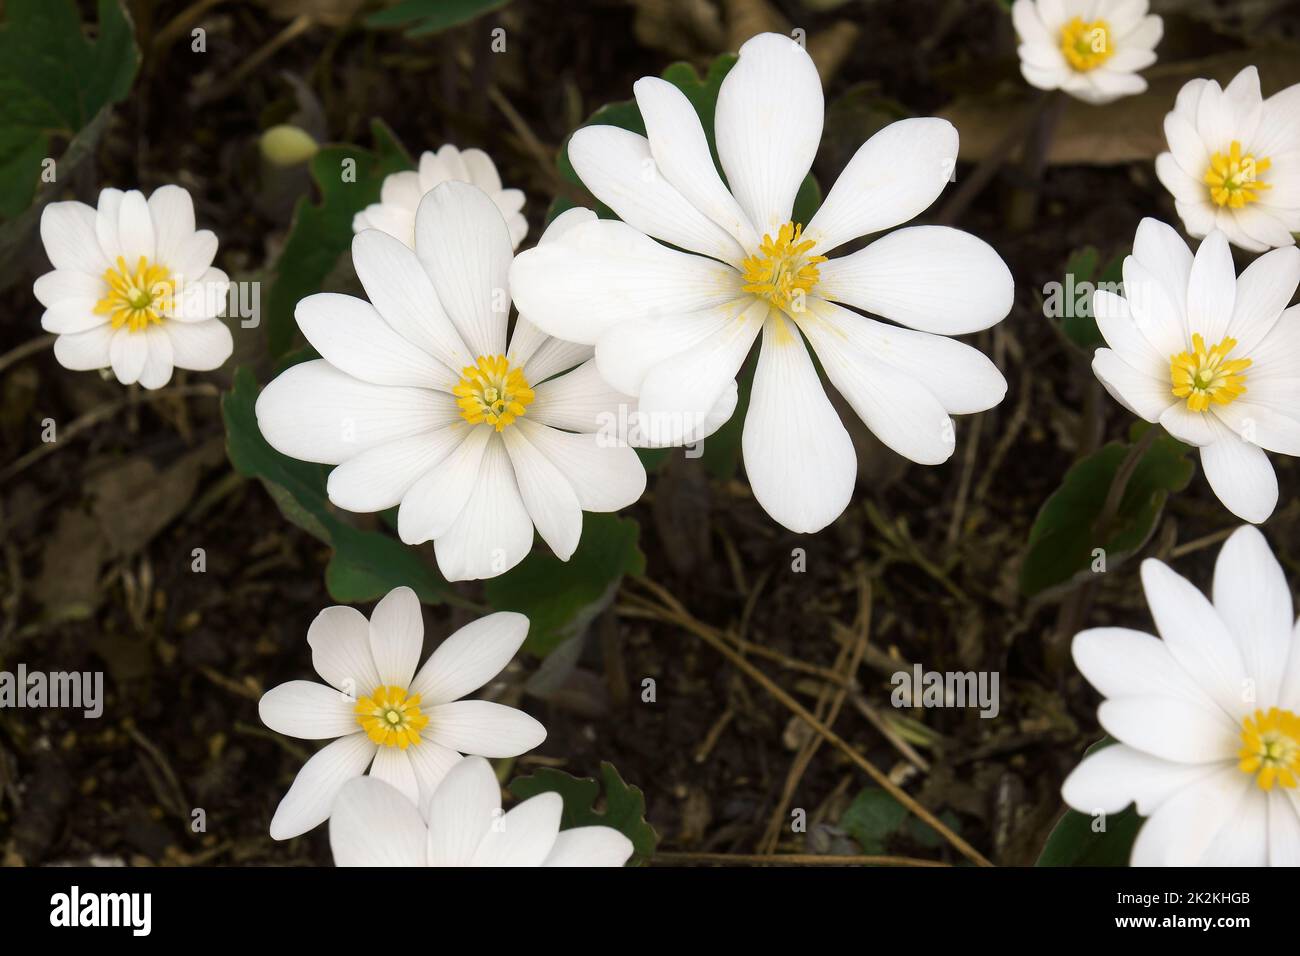 Close-up image of Bloodroot flowers Stock Photo